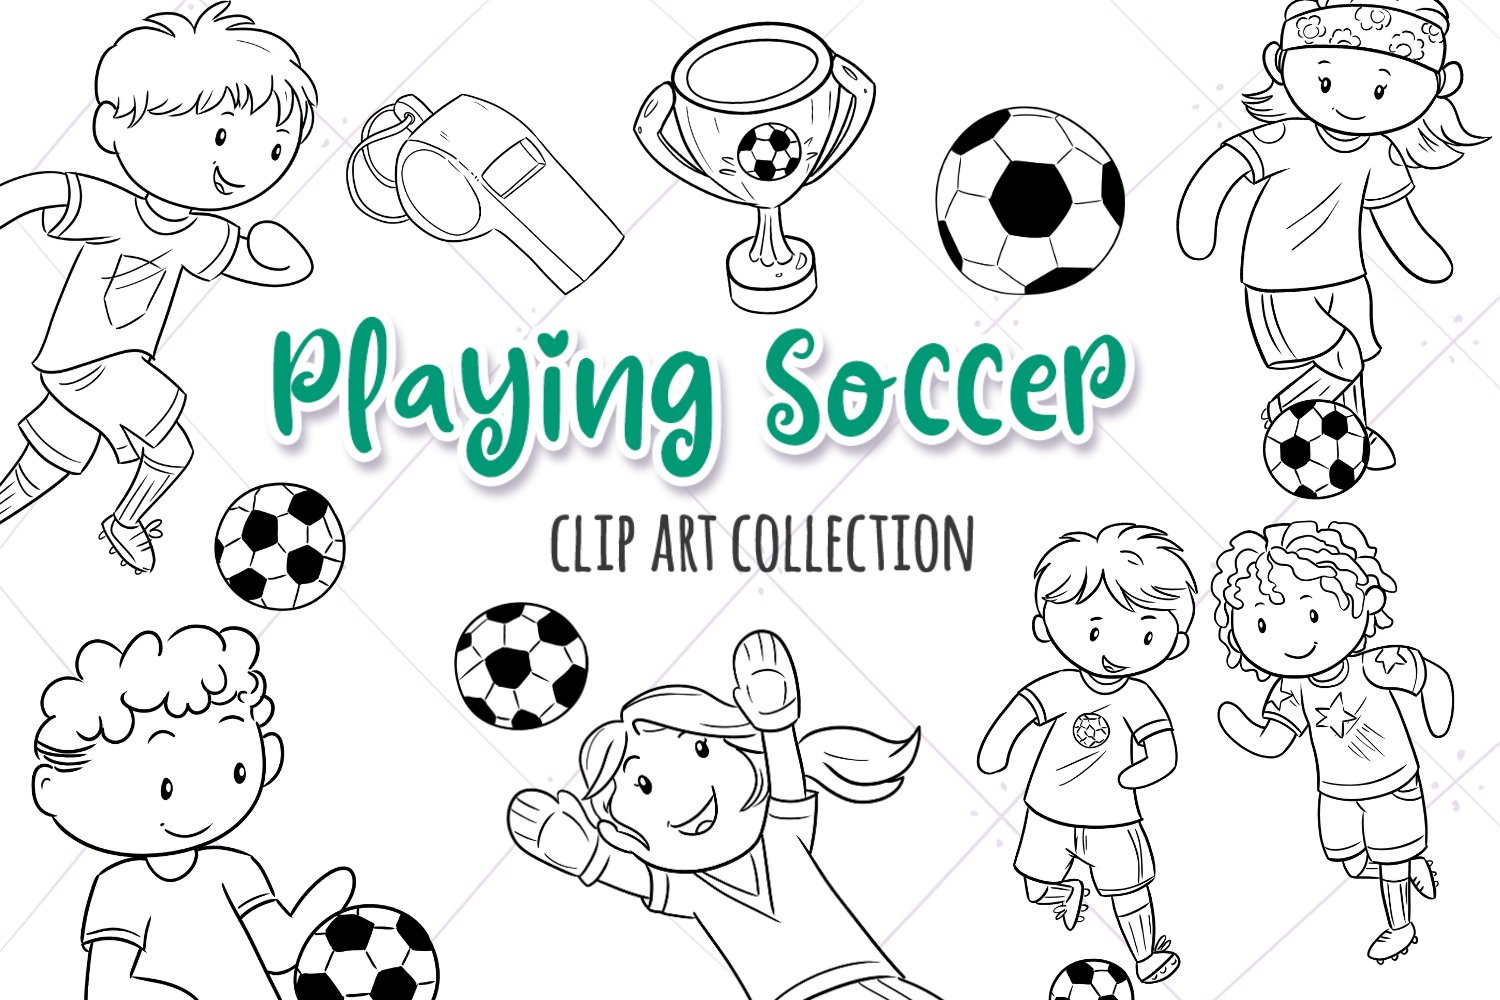 Kids Playing Soccer Black and White cover image.